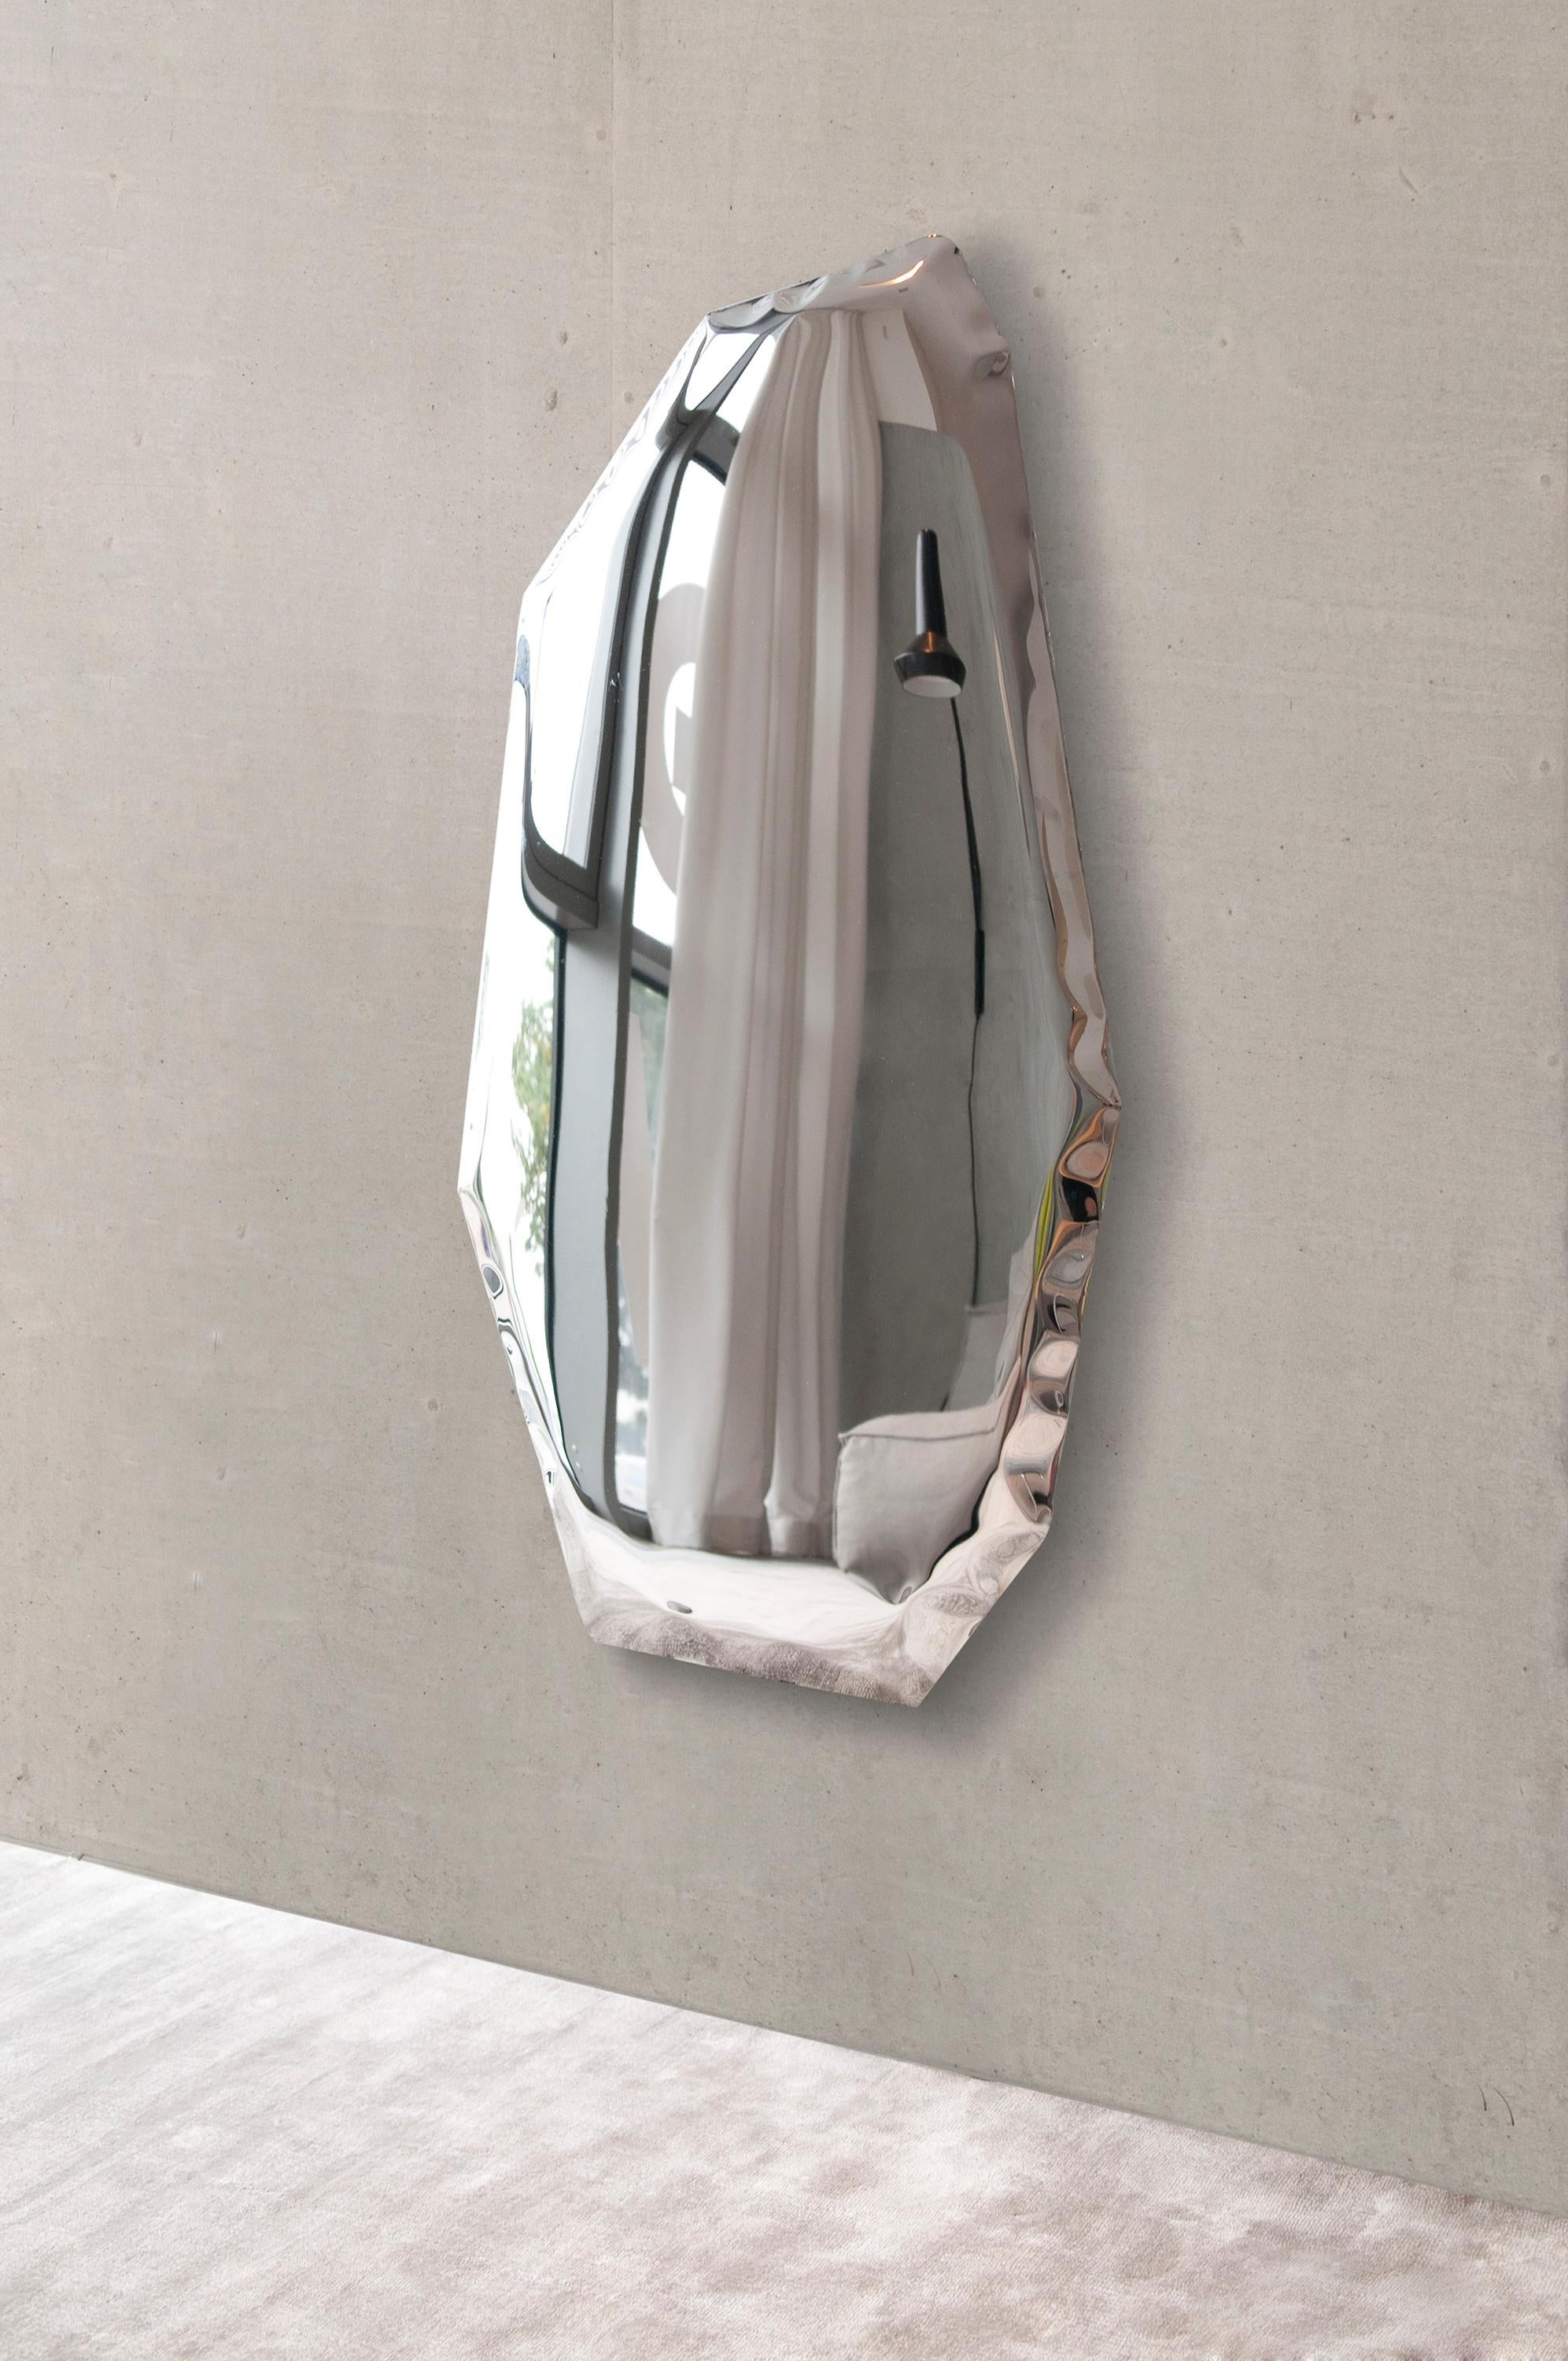 Stainless Steel Tafla C2 Sculptural Wall Mirror by Zieta For Sale 1